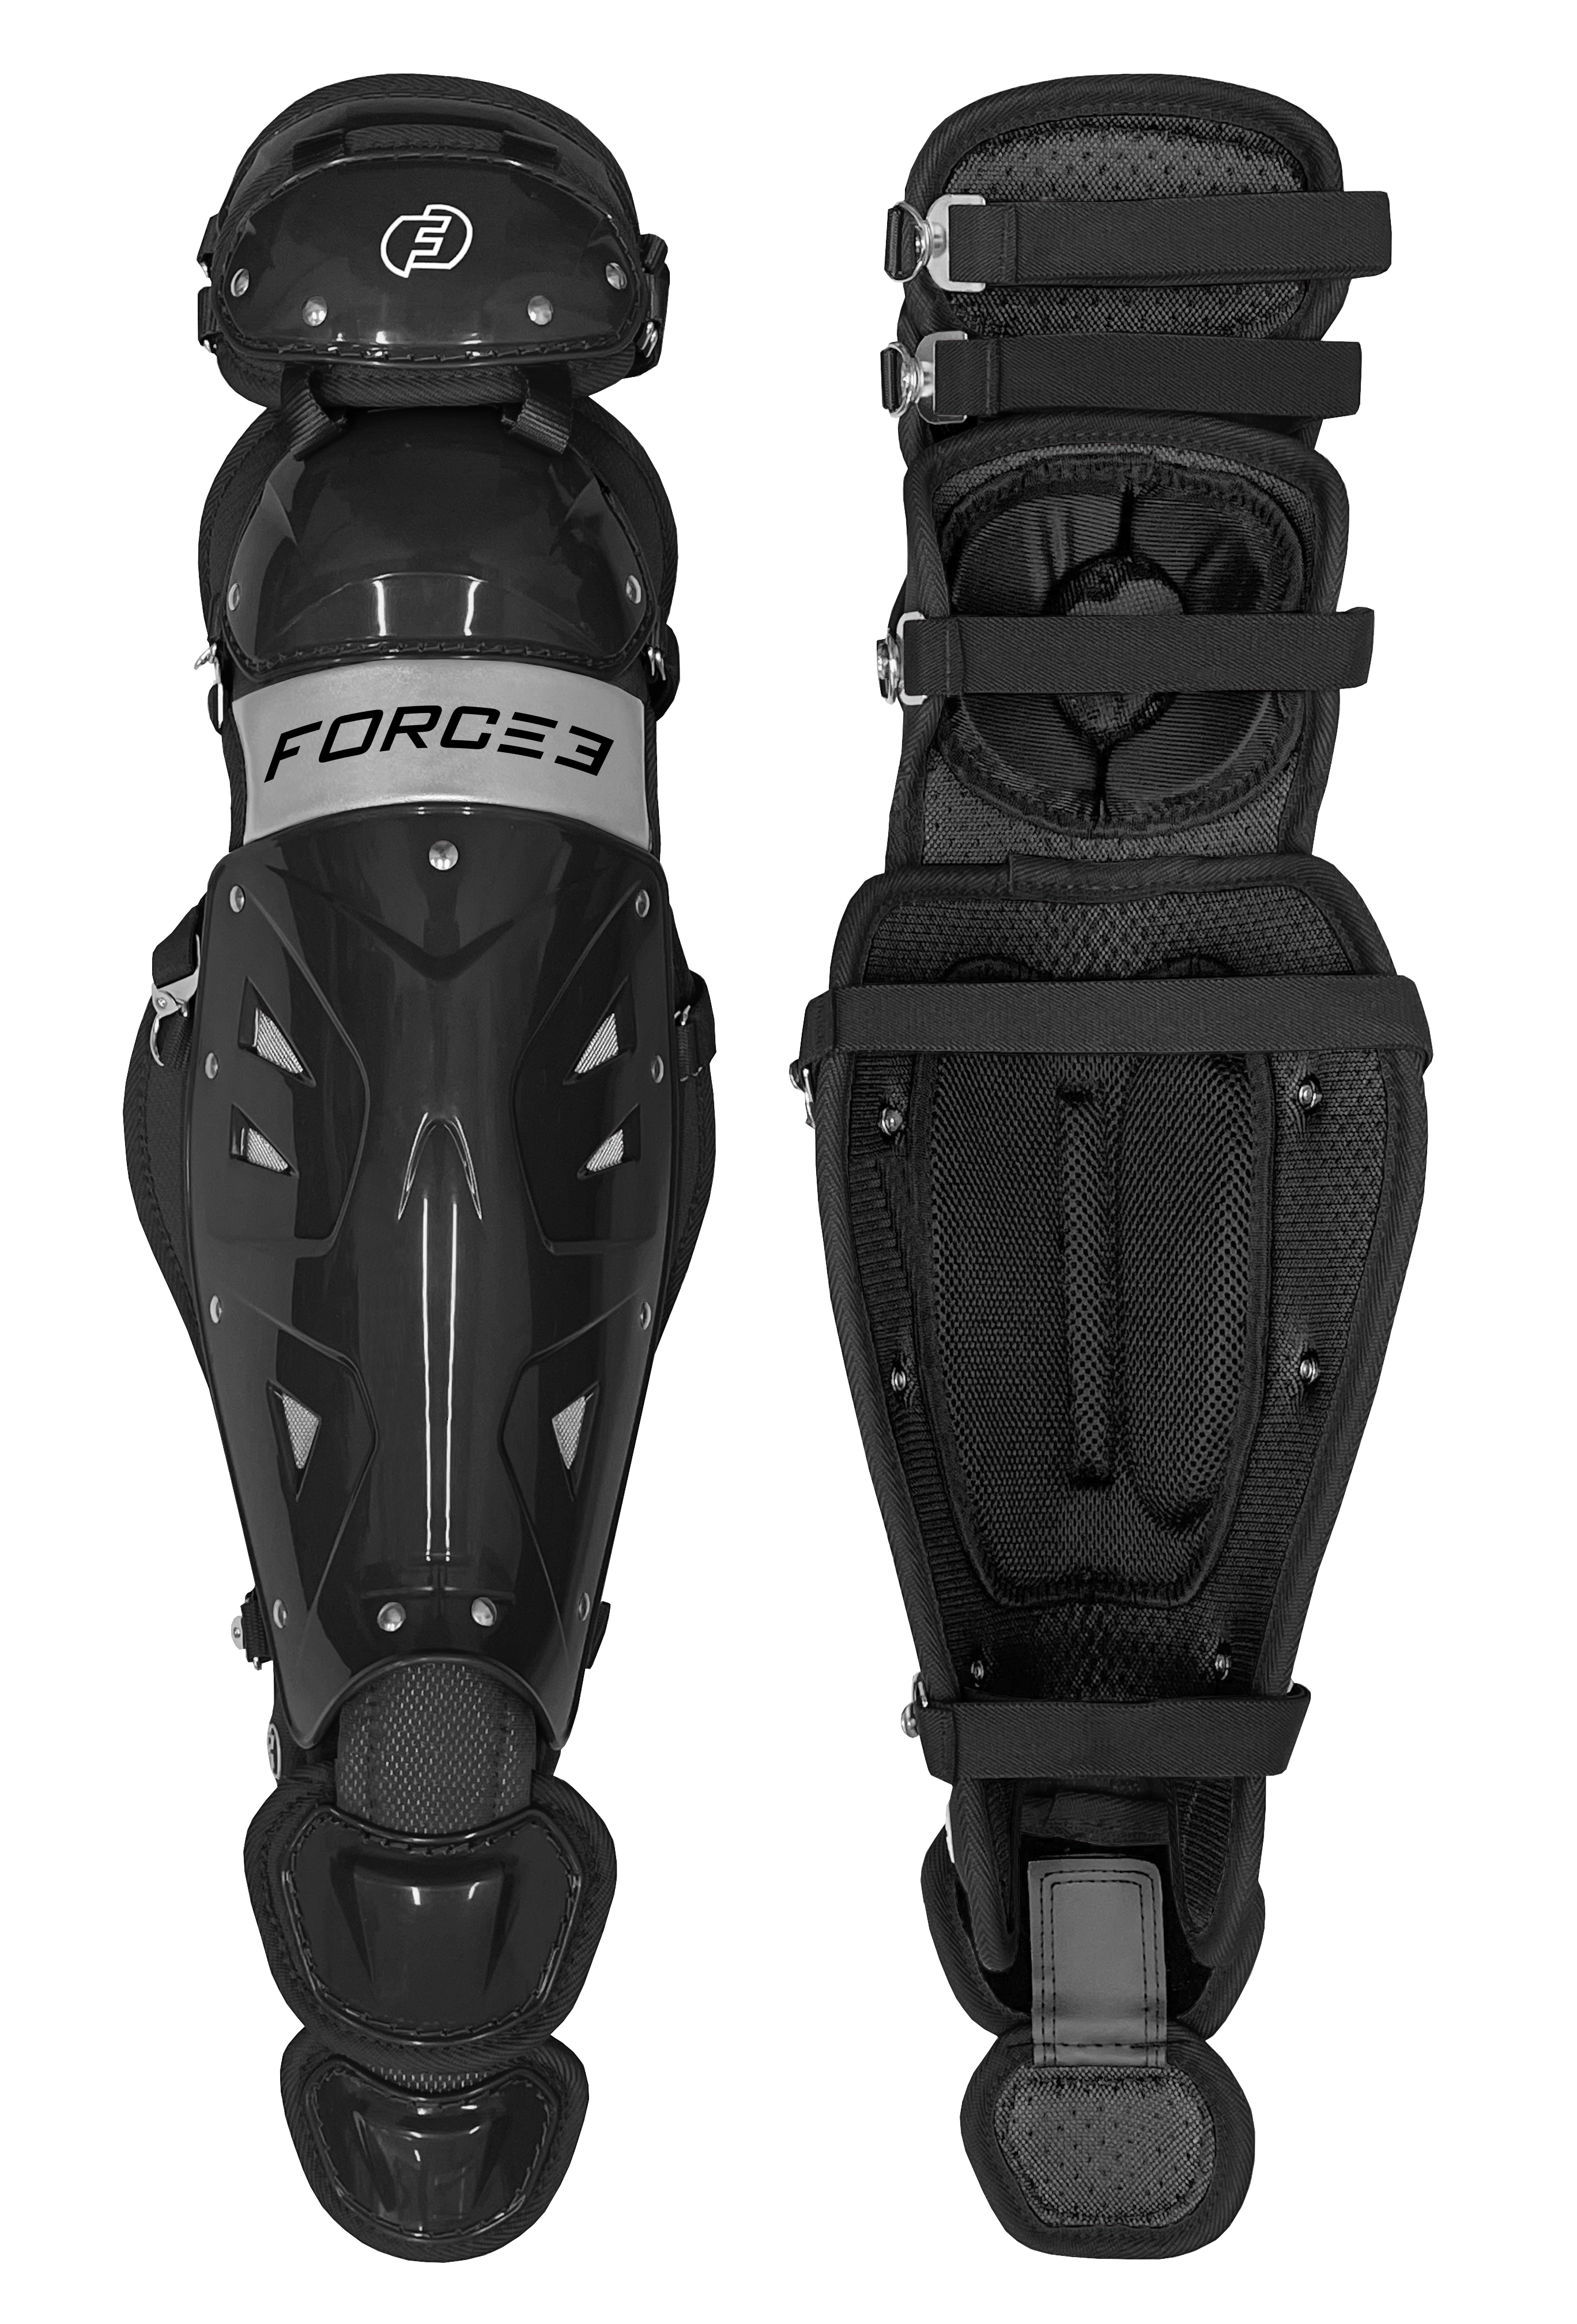 Force3 Adult | Pro Gear Catcher Shin Guards with Dupont Kevlar